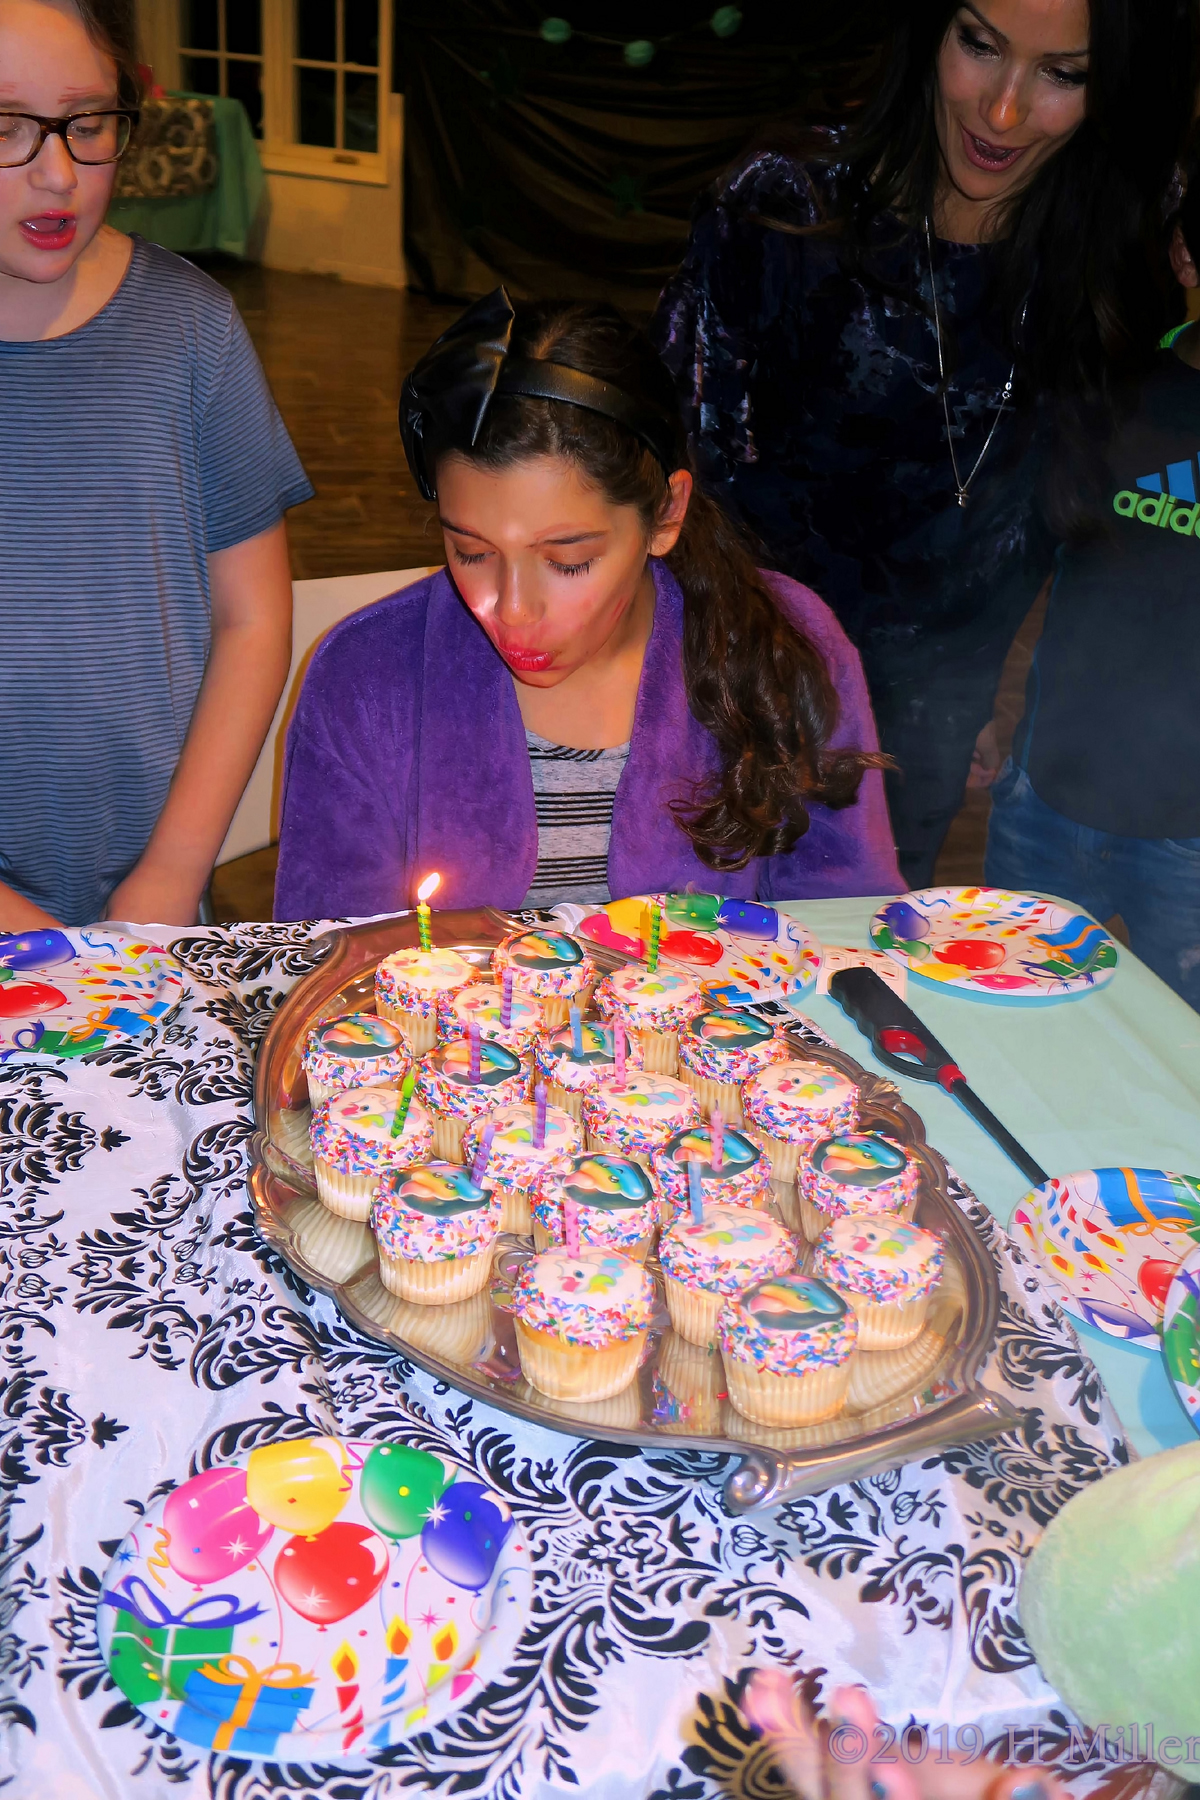 Nowhere I'd Rather Be! Blowing Out Candles On Birthday Cupcakes! 1